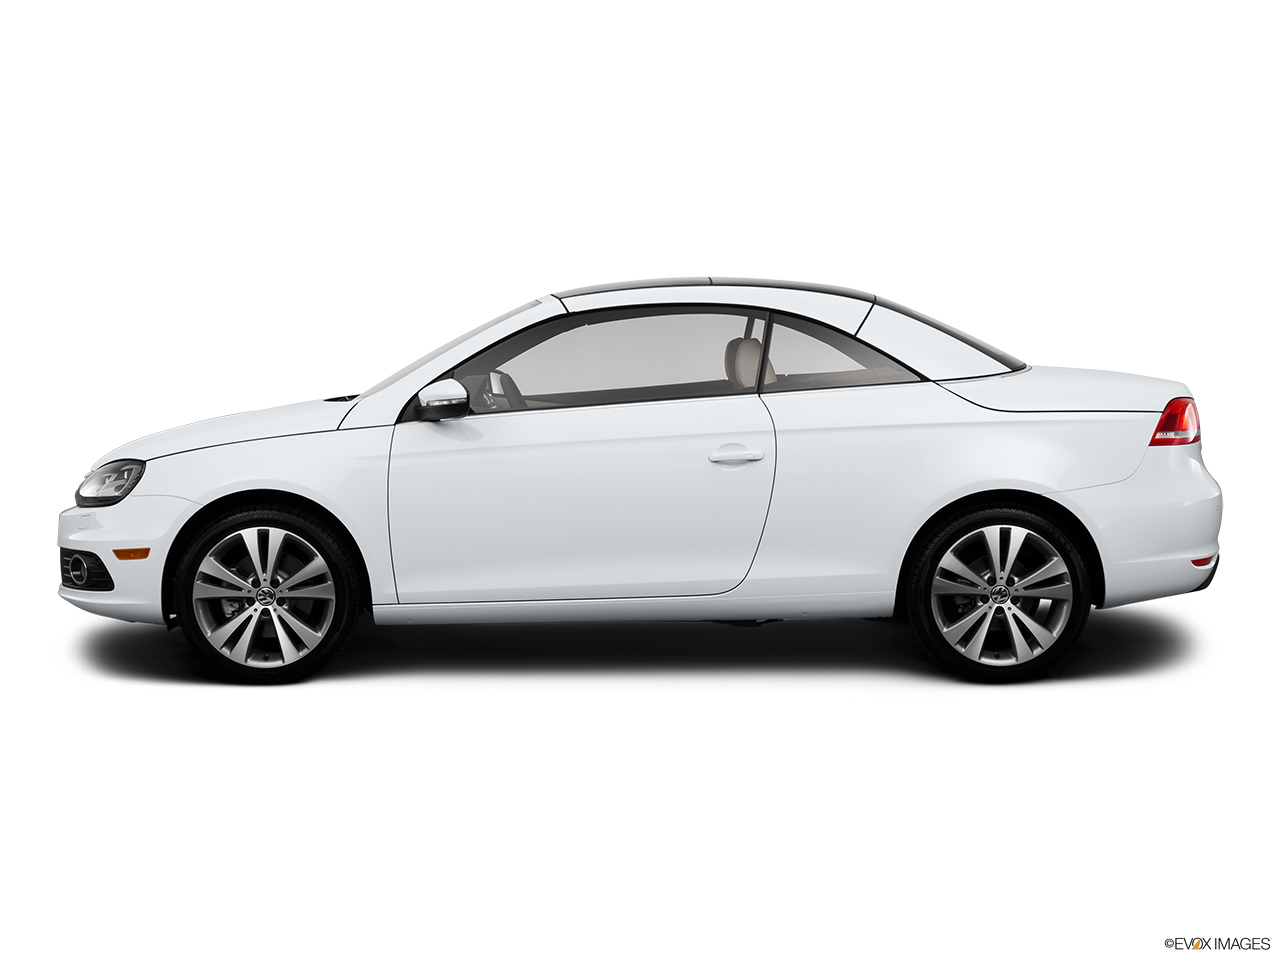 2013 Volkswagen Eos Lux Drivers side profile, convertible top up (convertibles only). 